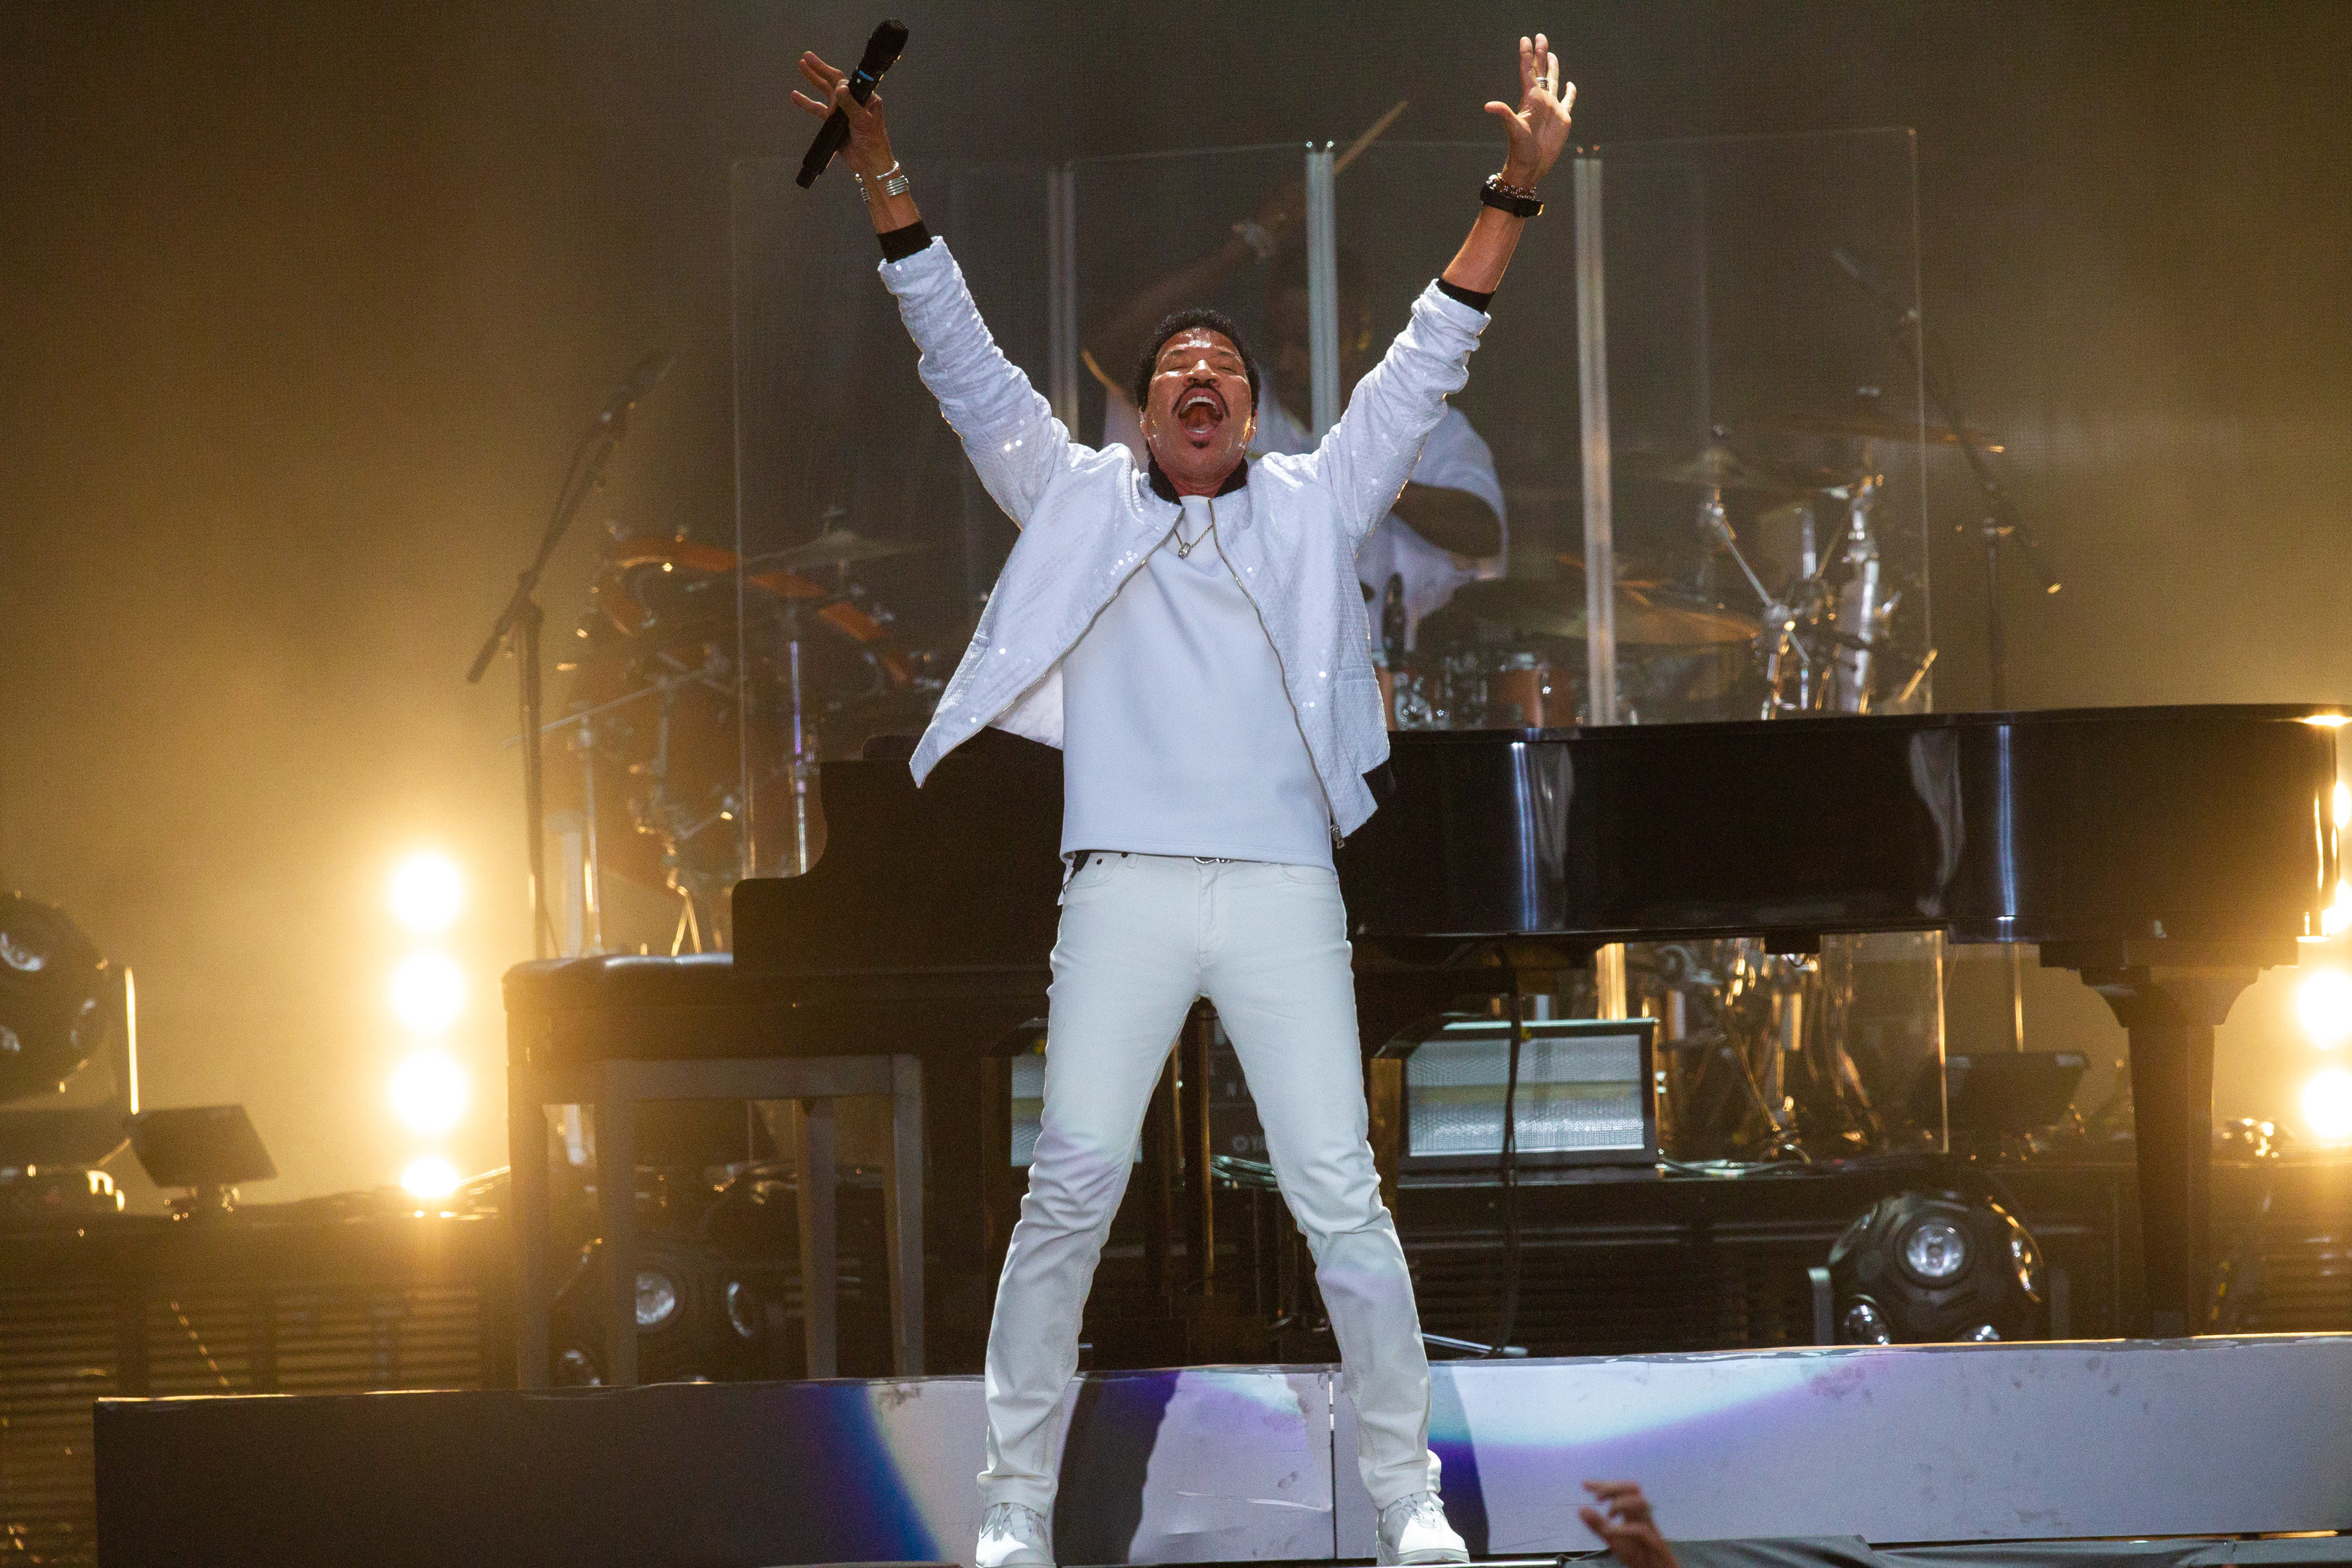 Lionel Richie wowing the crowd in Perth